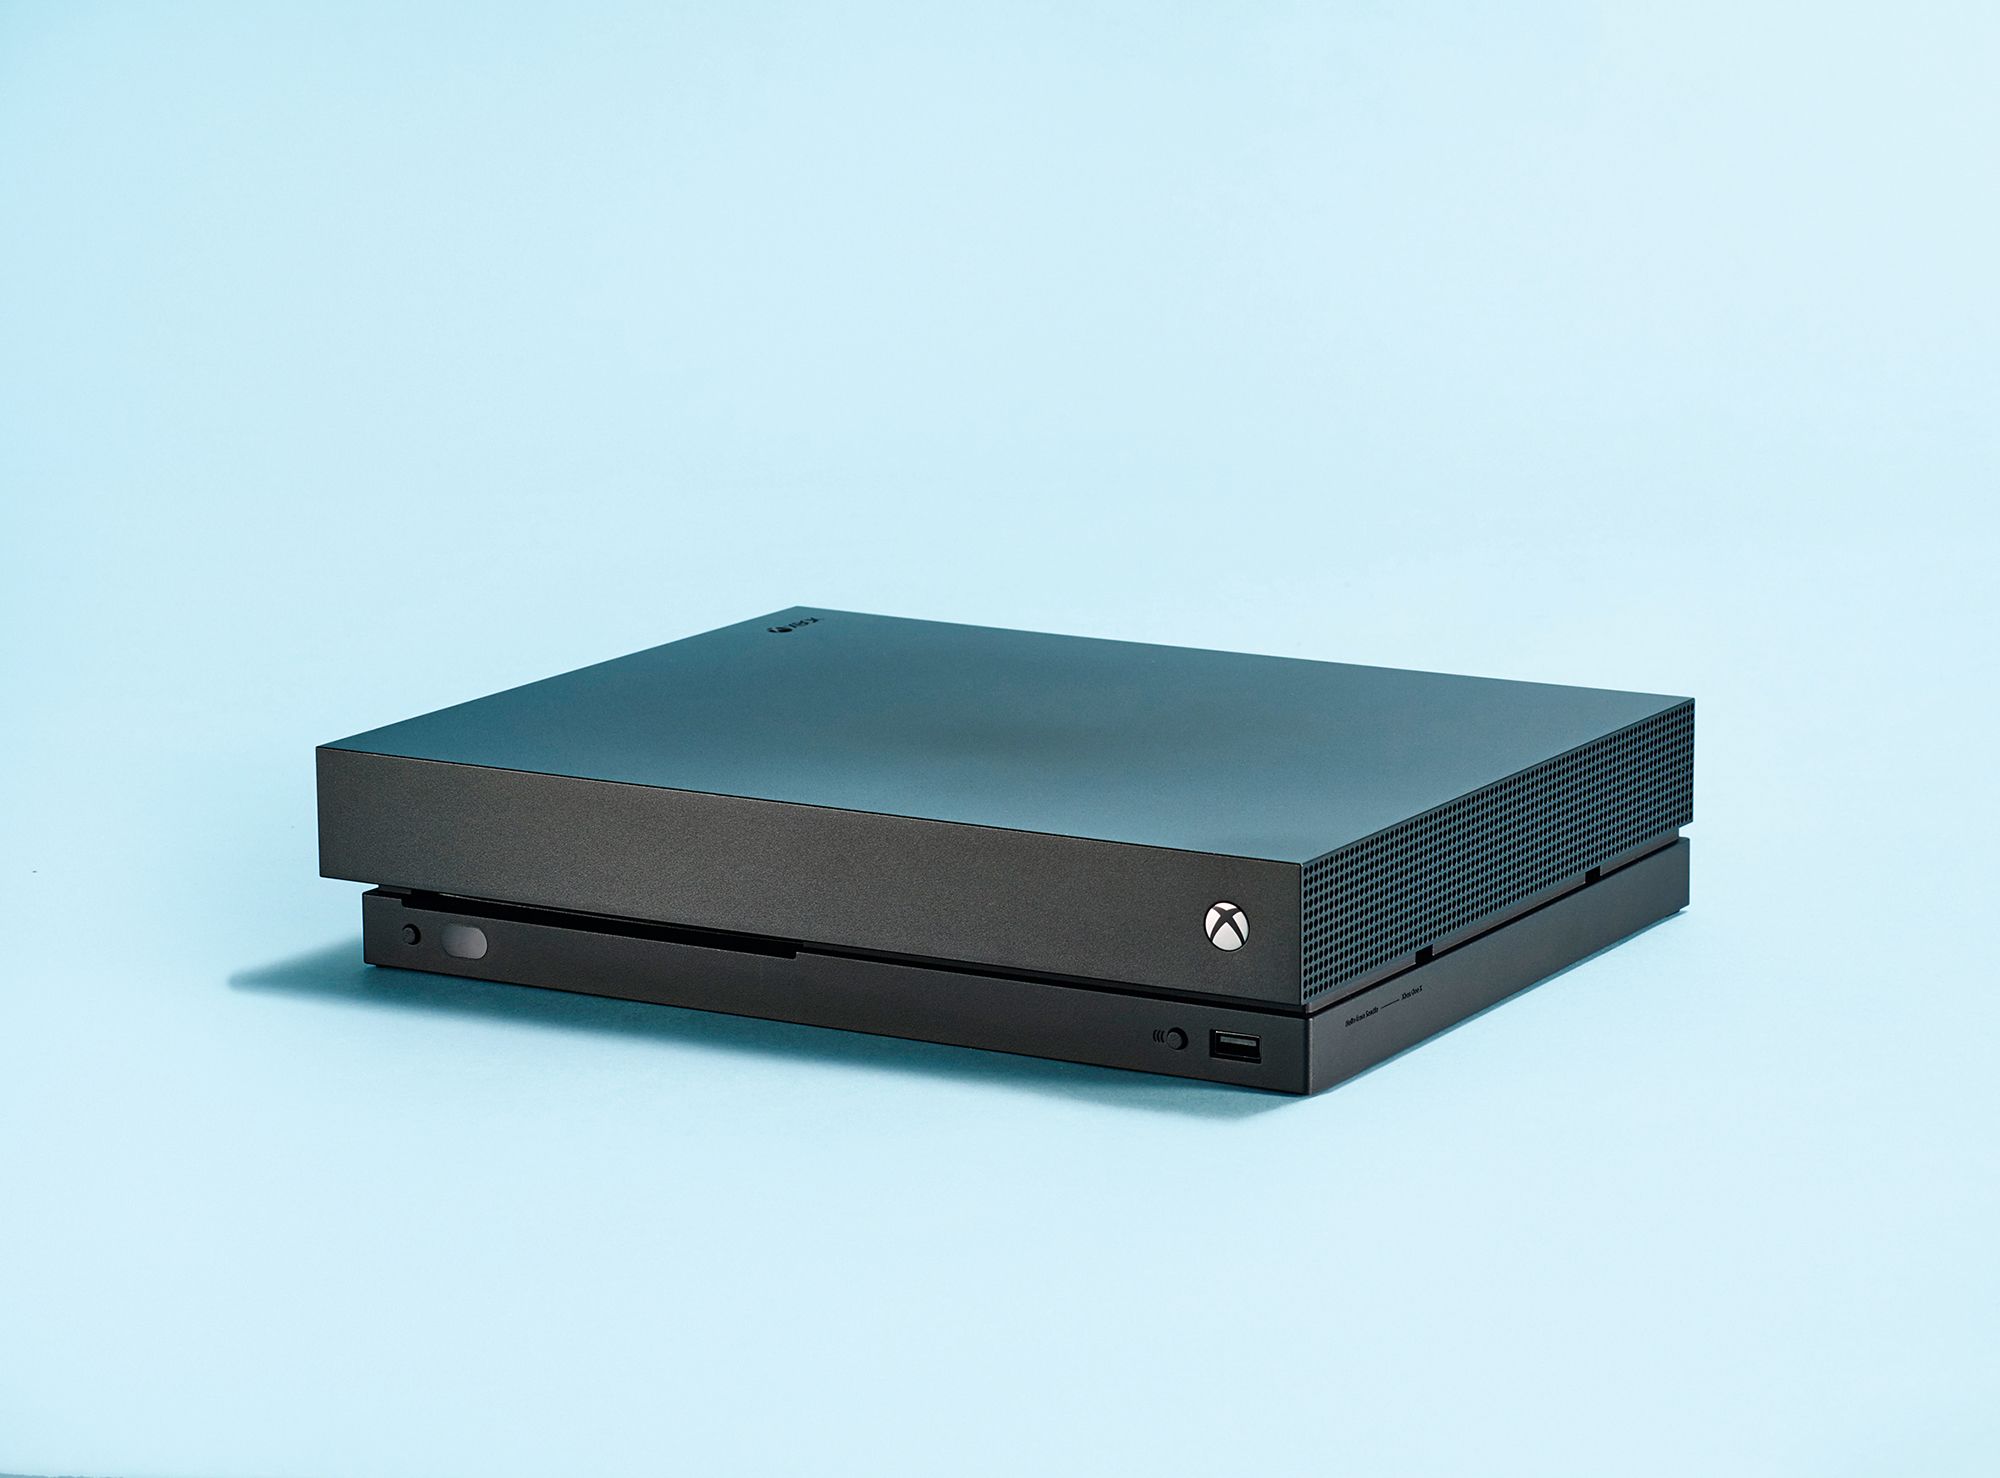 Microsoft has stopped making the Xbox One X and Xbox One S All